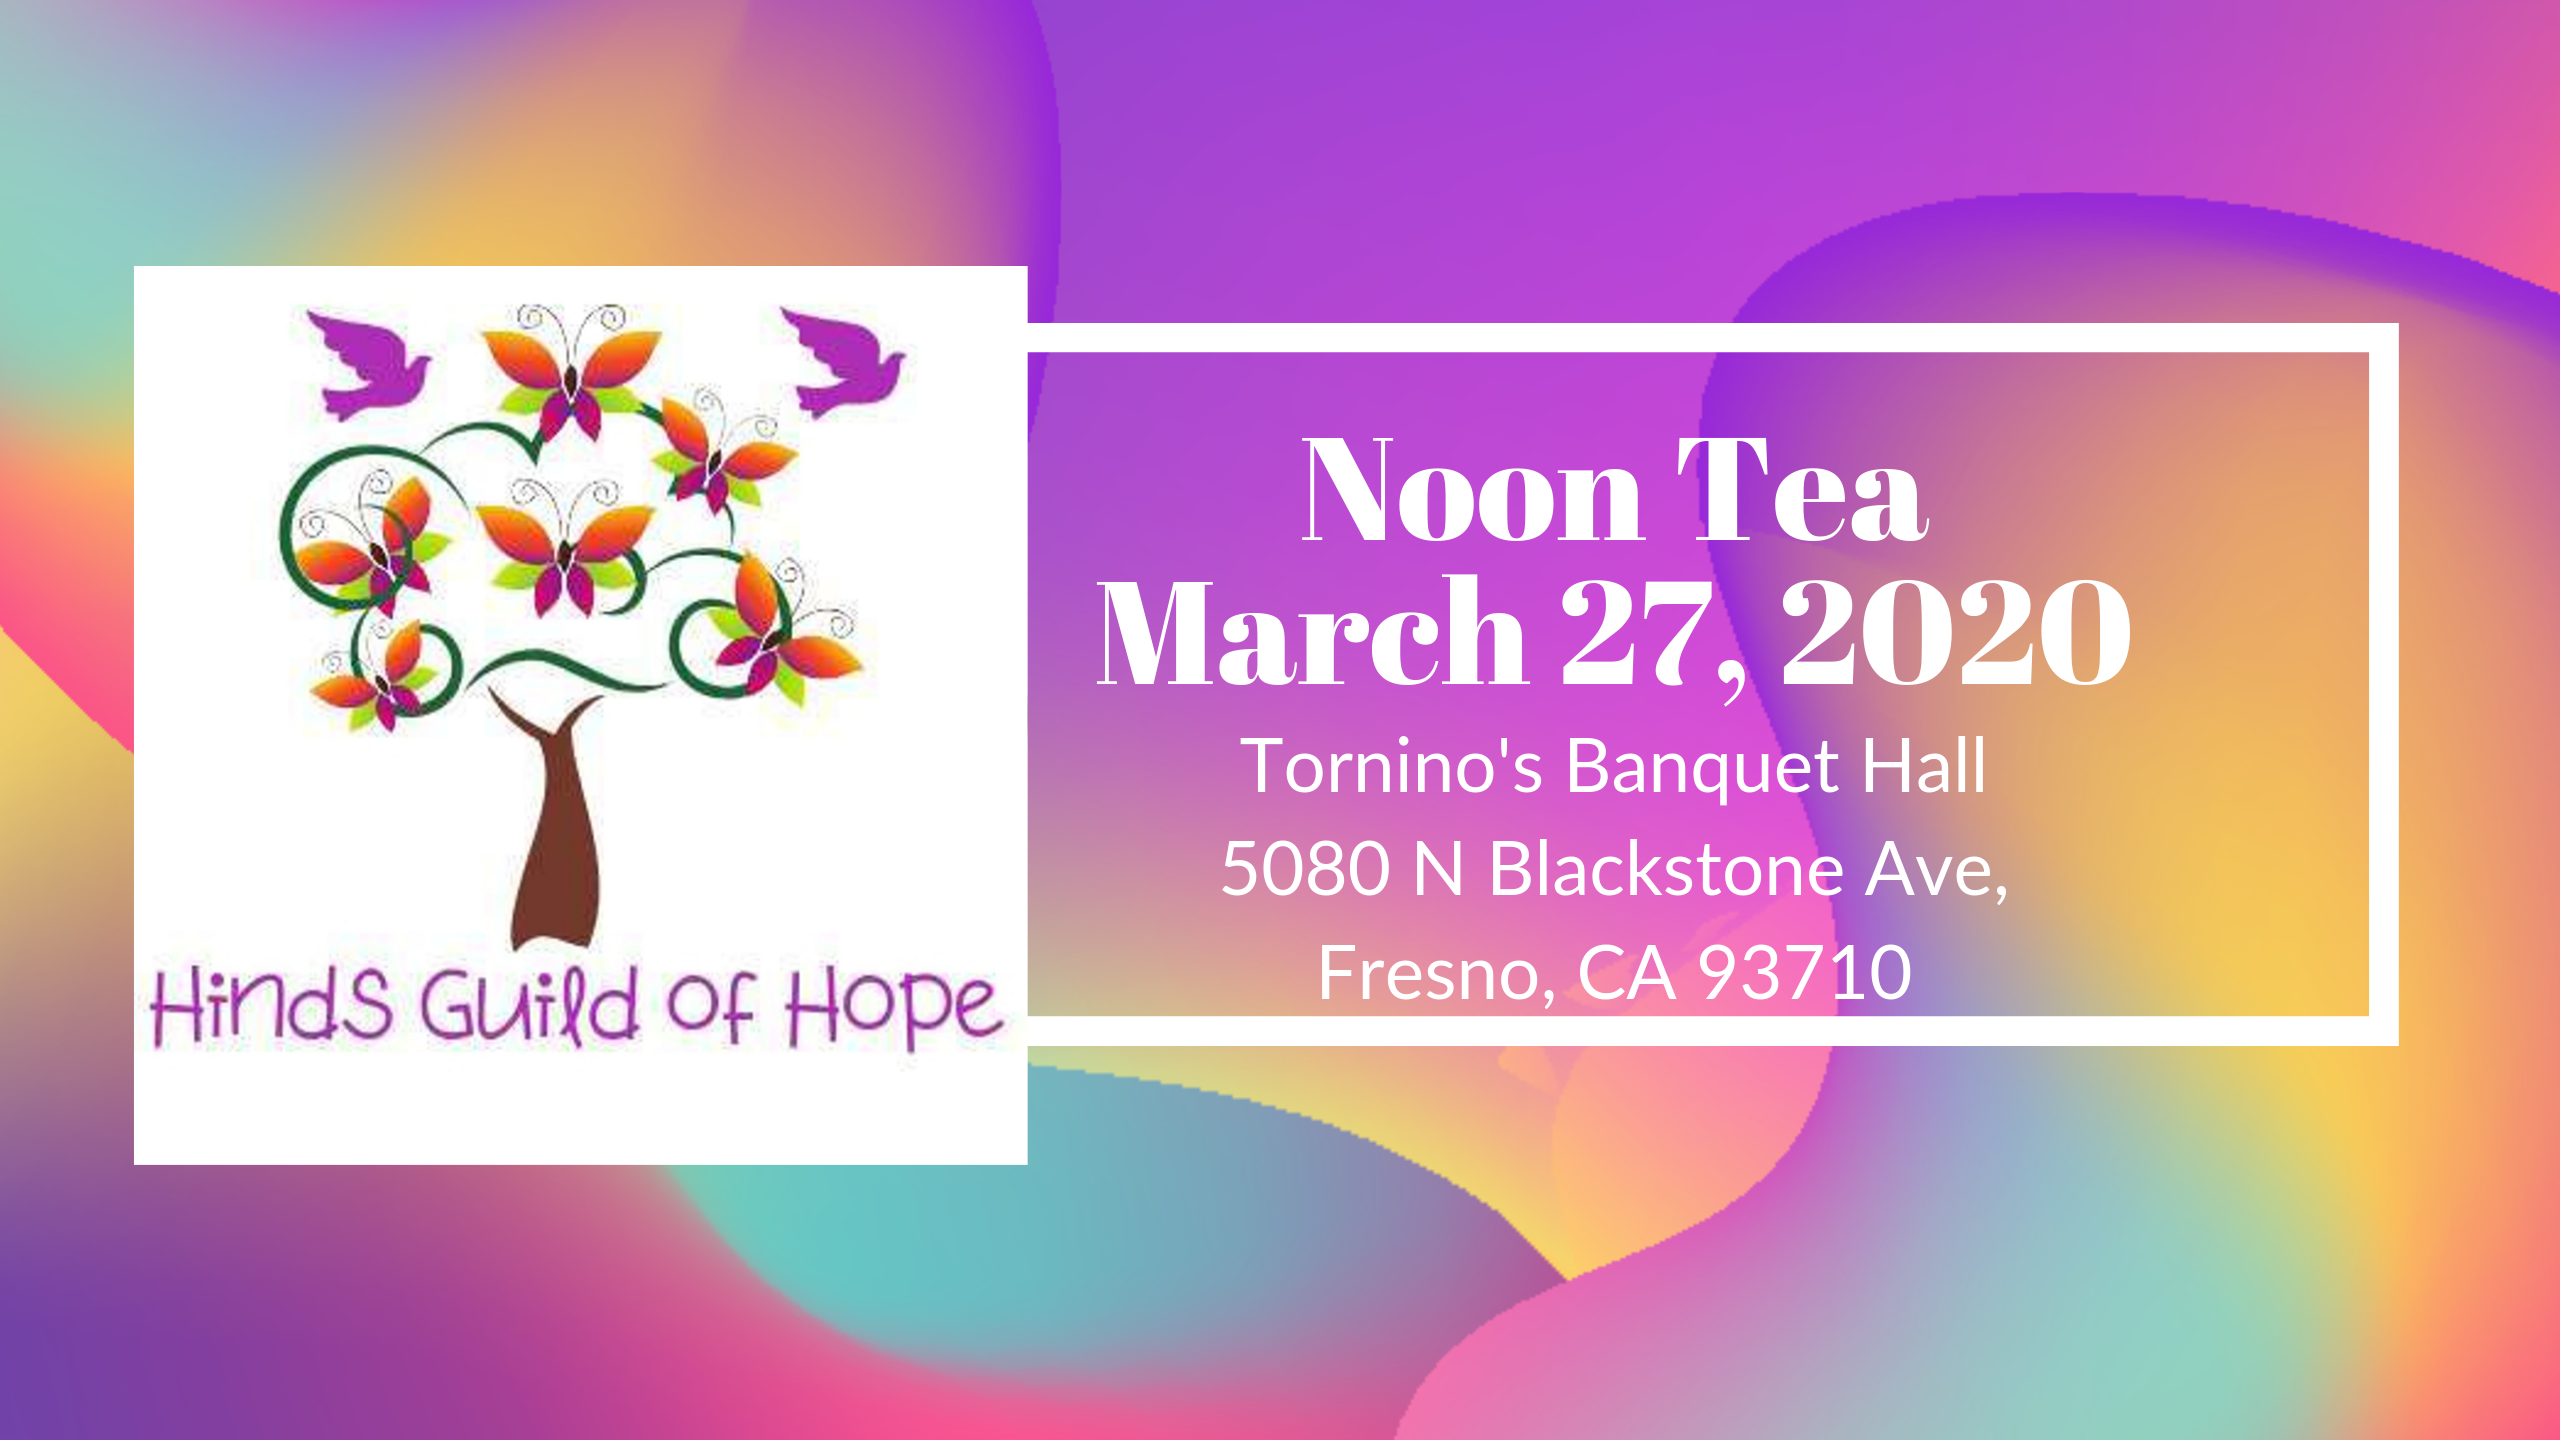 Hinds Guild of Hope Noon Tea